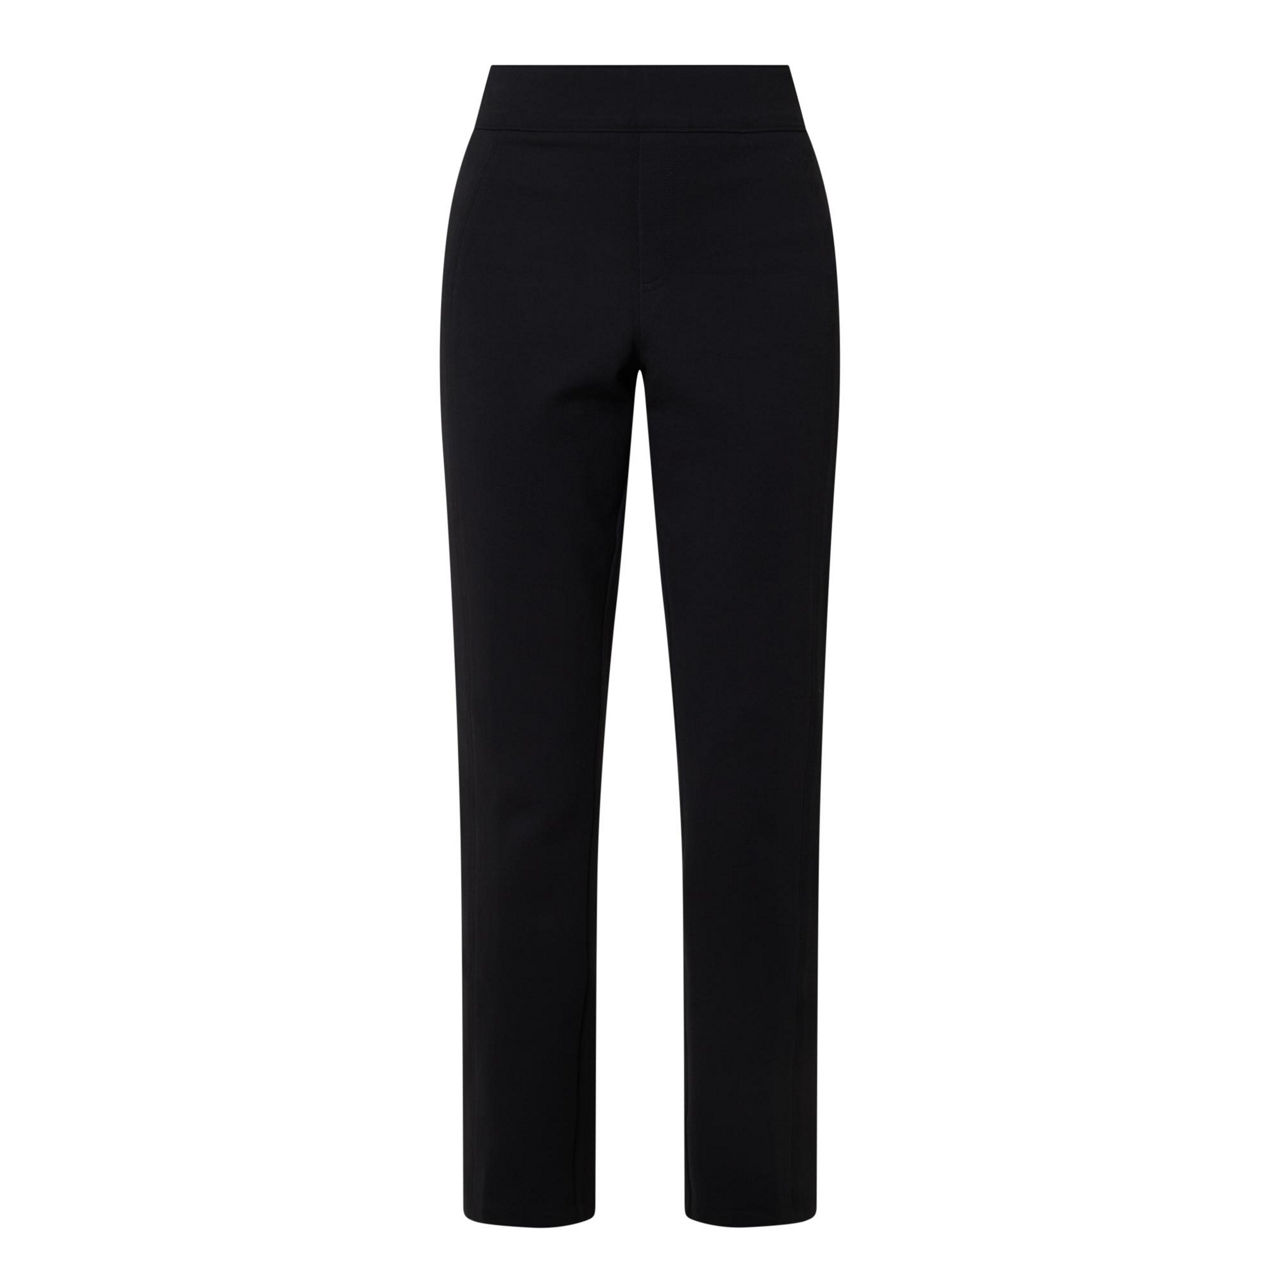 Women's High-Rise Modern Ankle Jogger Pants - A New Day™ Black XL